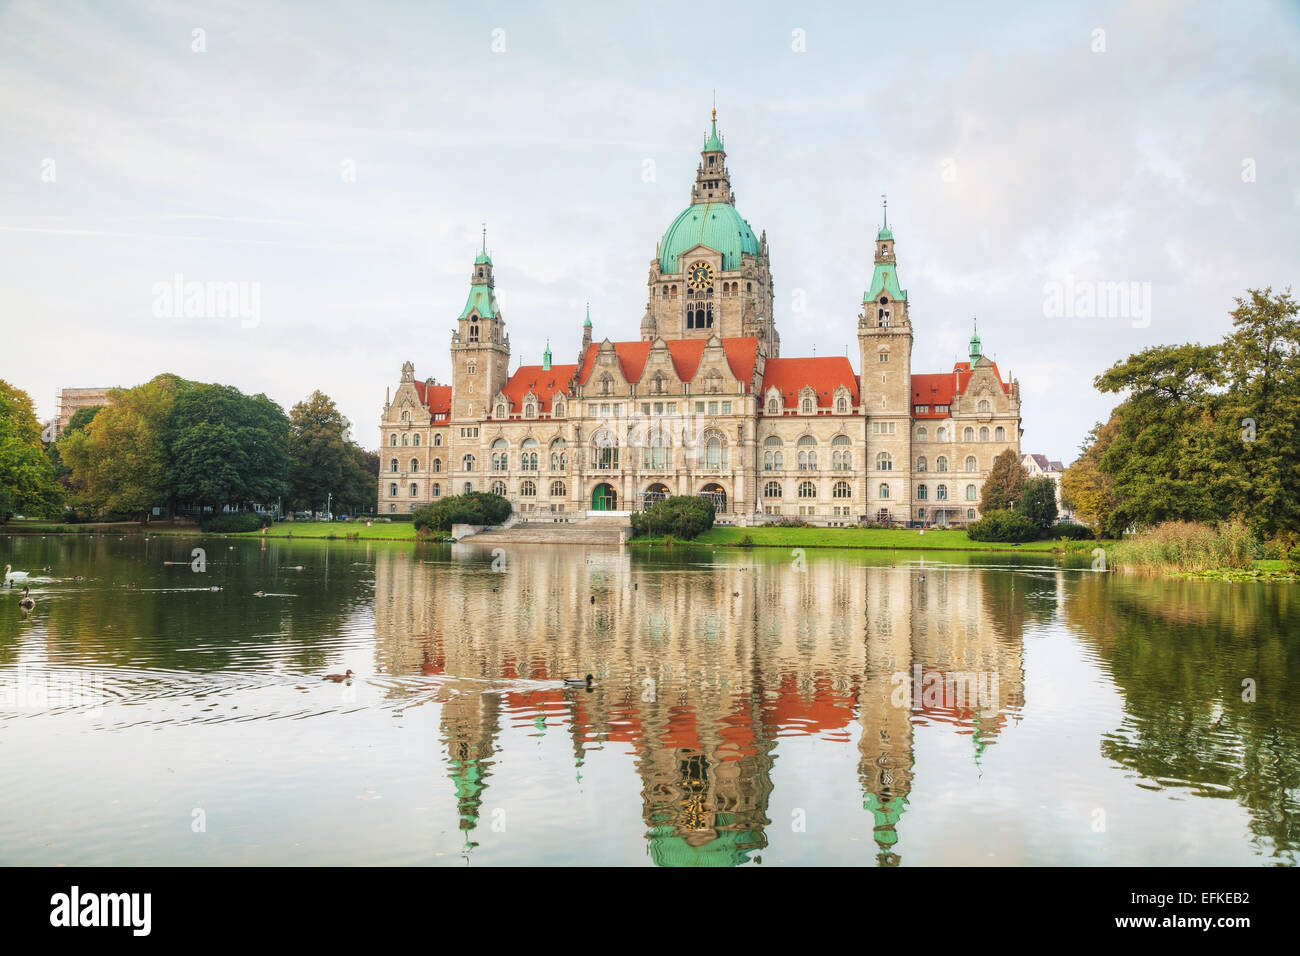 Neues Rathaus in Hannover am Abend Stockfoto